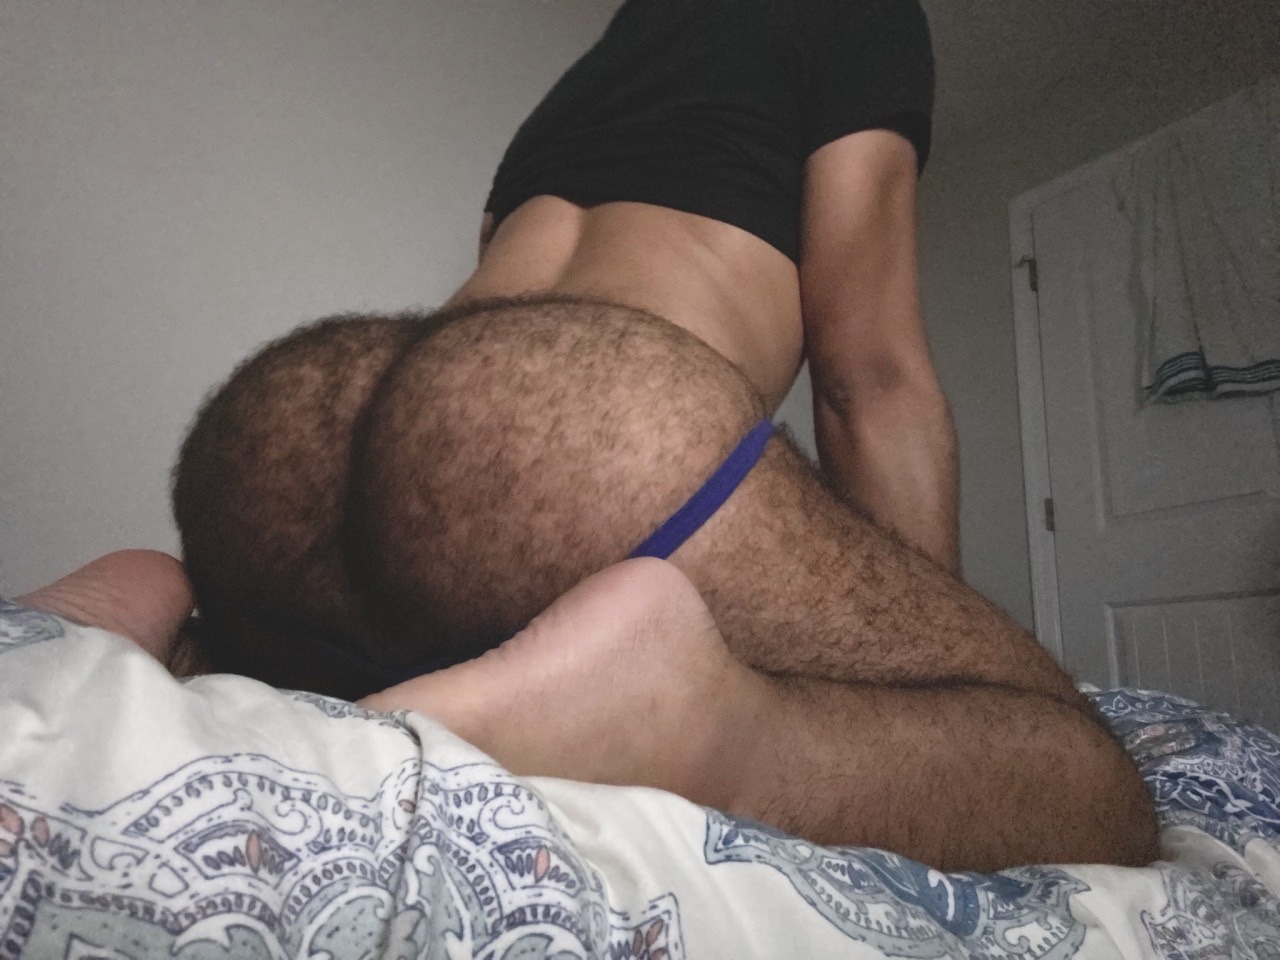 Sex furrydudeposts:poilupeludo:So furry on the pictures